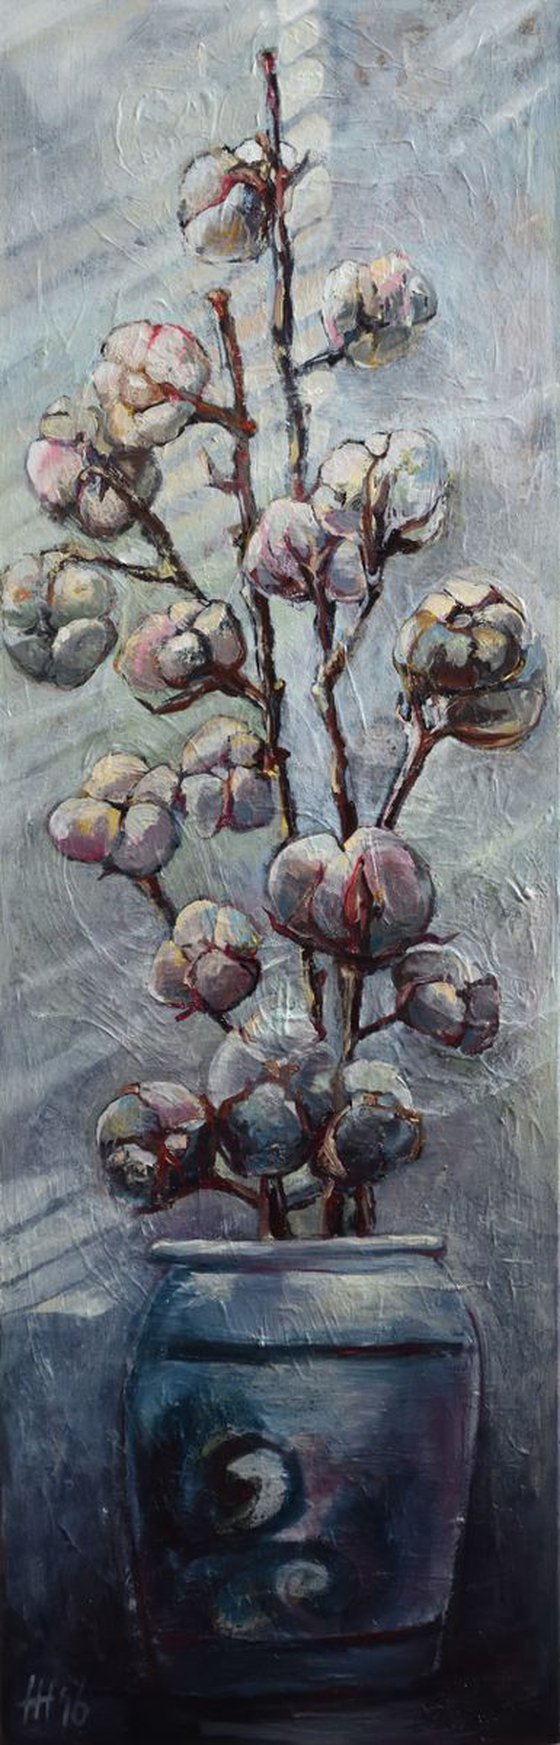 Still life with Cotton